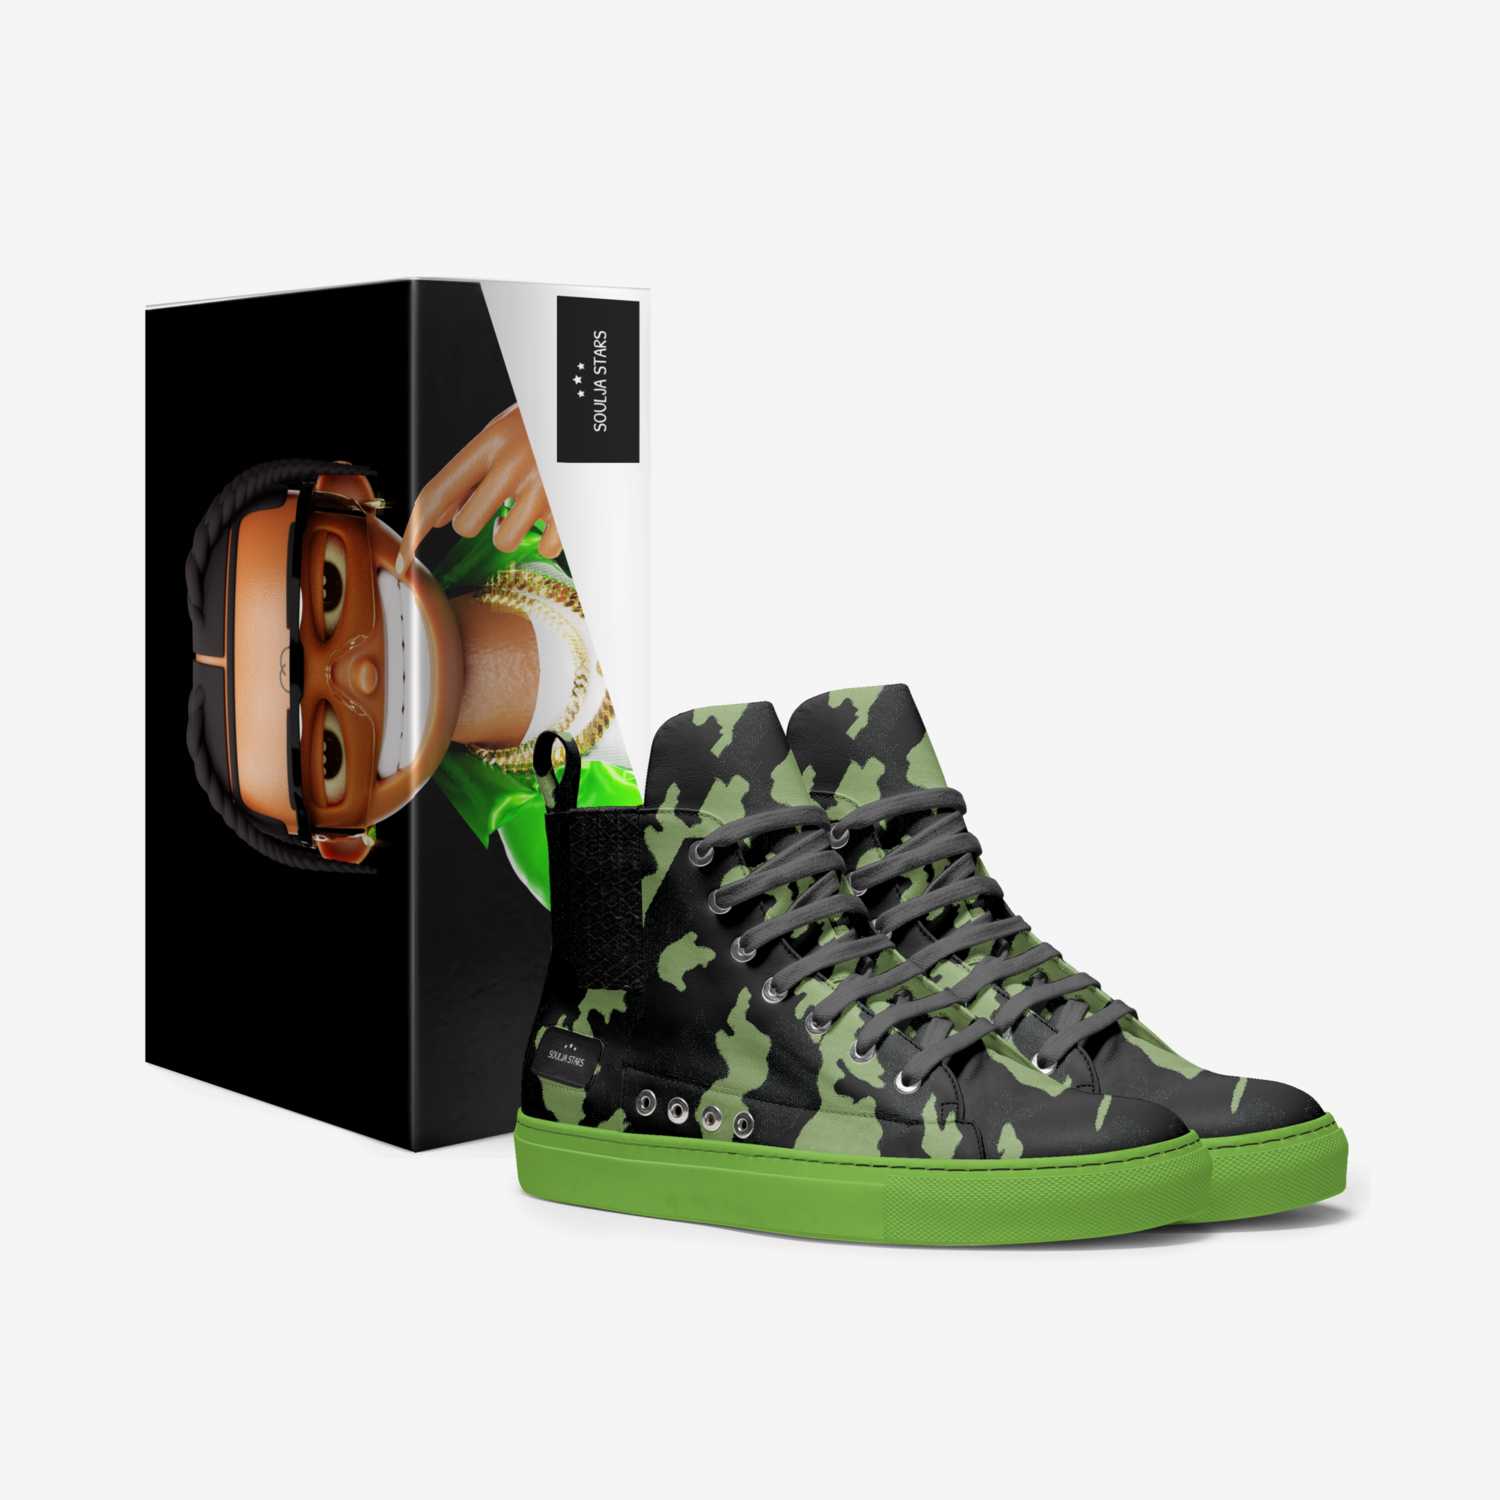 Soulja Stars custom made in Italy shoes by Deandre Way | Box view